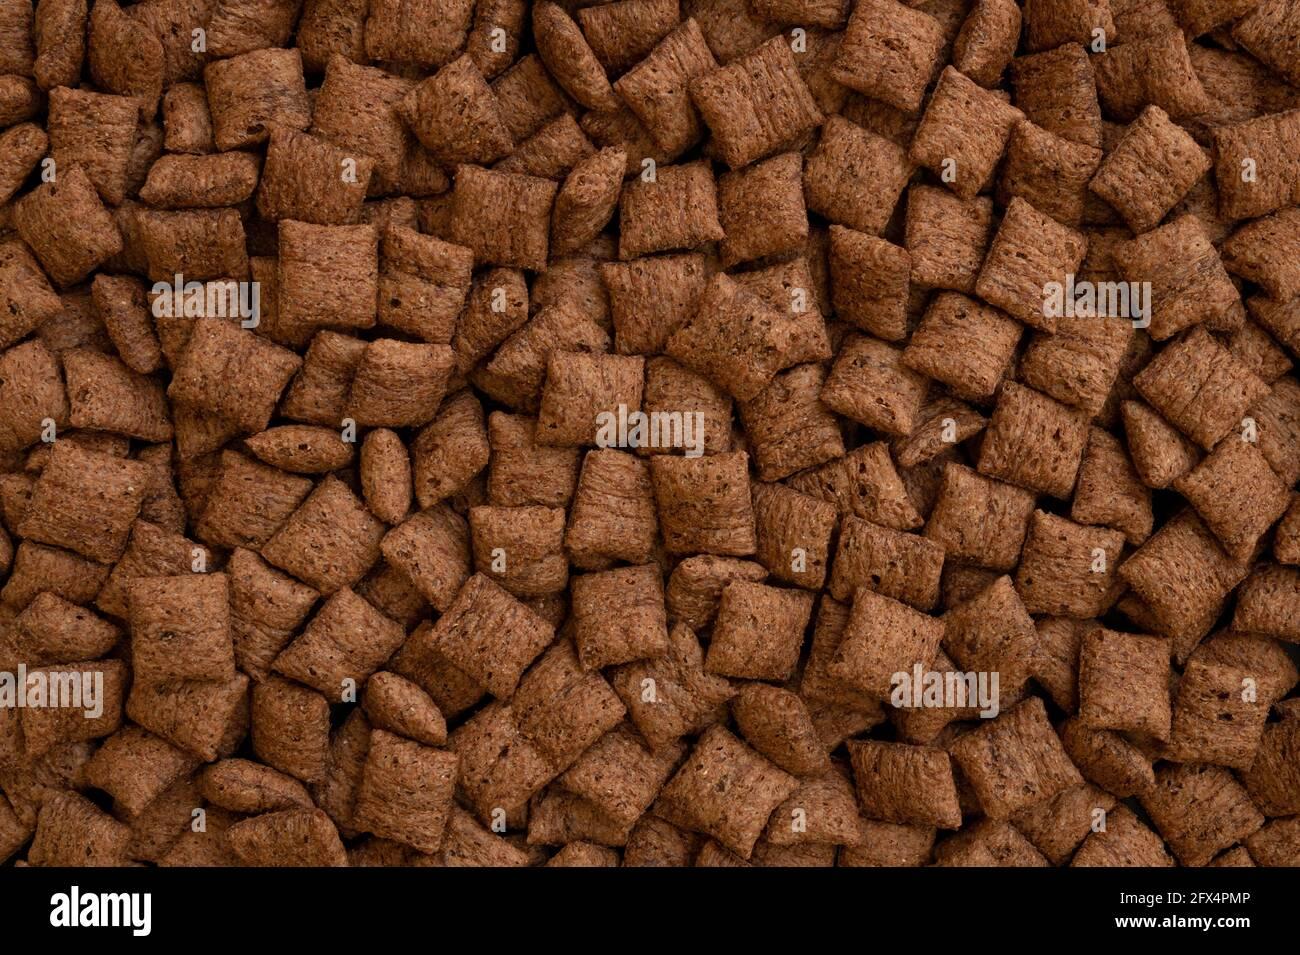 Chocolate Pillows Background Texture Brown Choco Cereal Pads